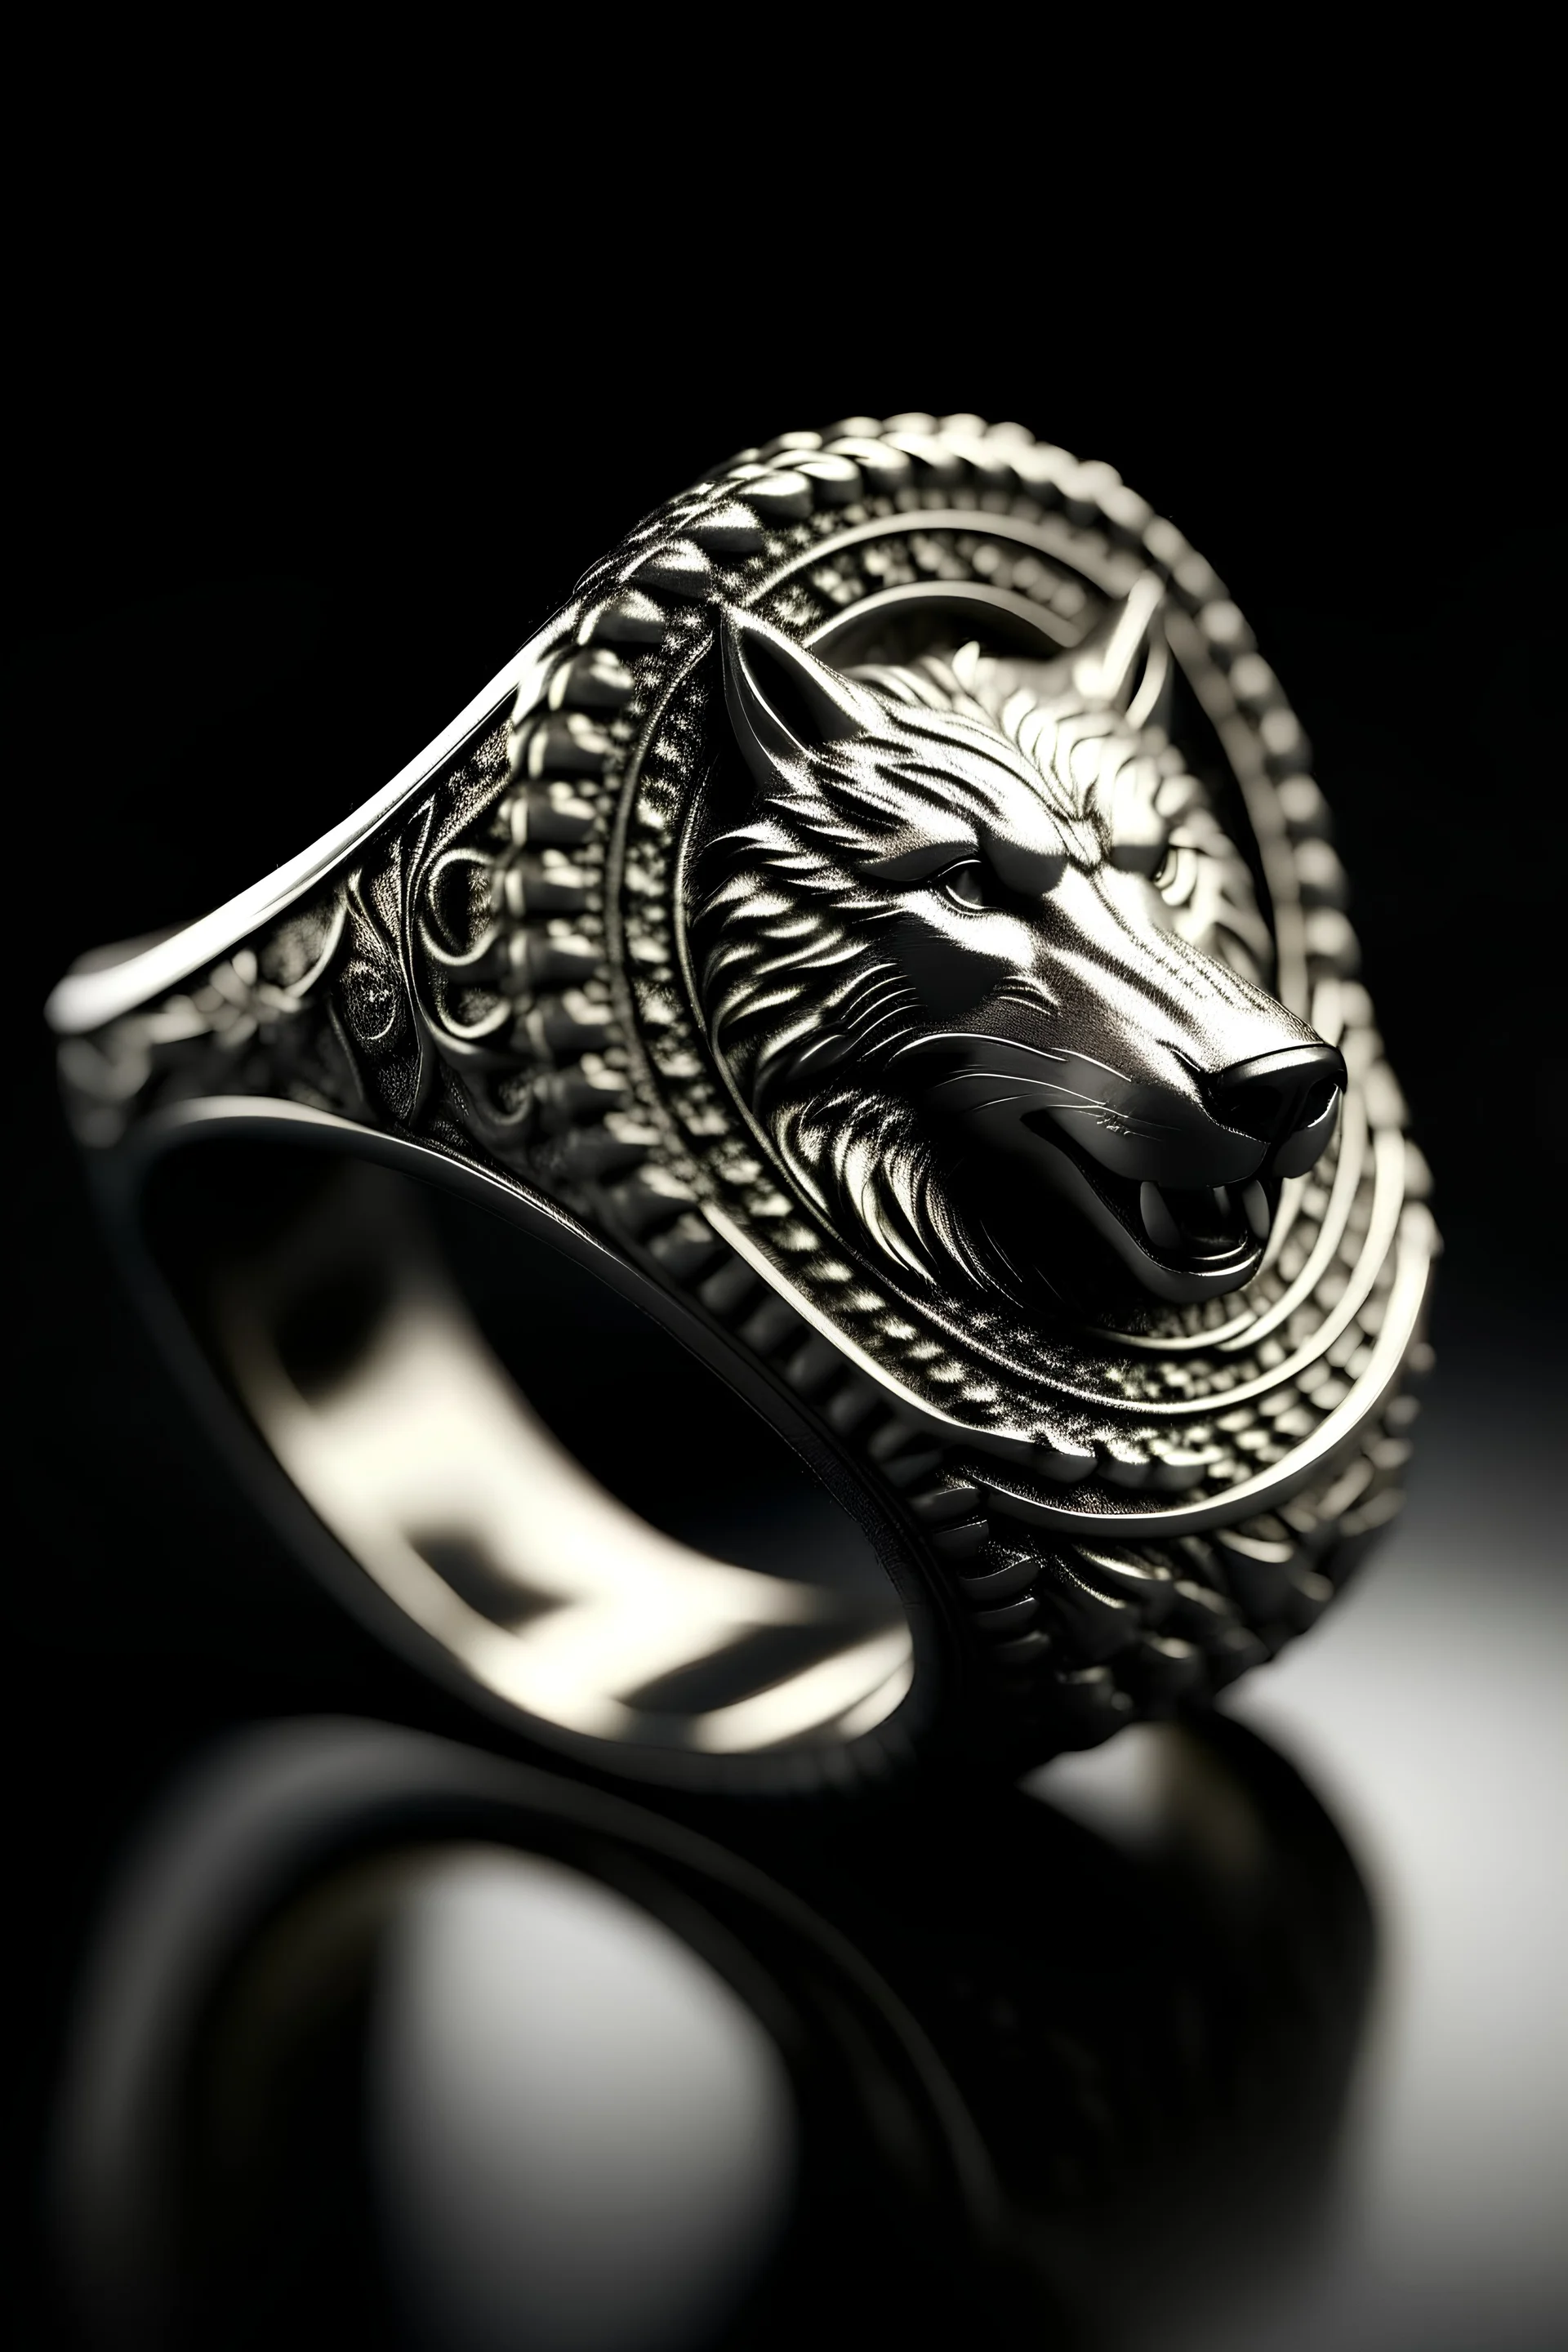 Silver Direwolf signet ring, collector's item, clean background, studio lighting, product photography, ultra-high definition, 8K, hyper-realistic, winning design, 3d render